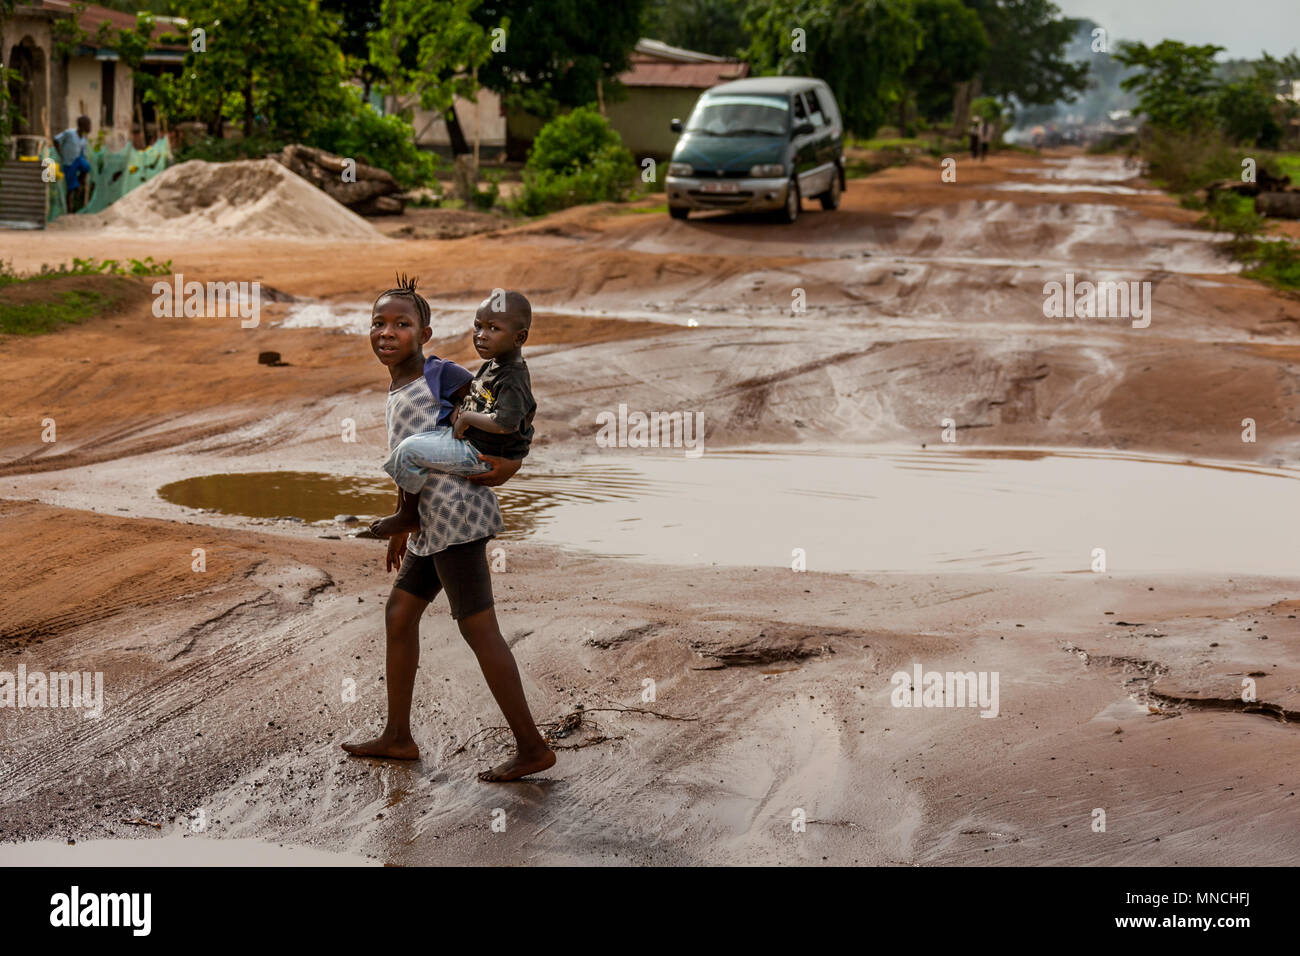 Yongoro, Sierra Leone - May 31, 2013: West Africa, the road after a storm with the holes full of water leading to Longi from Yongoro in front of the c Stock Photo